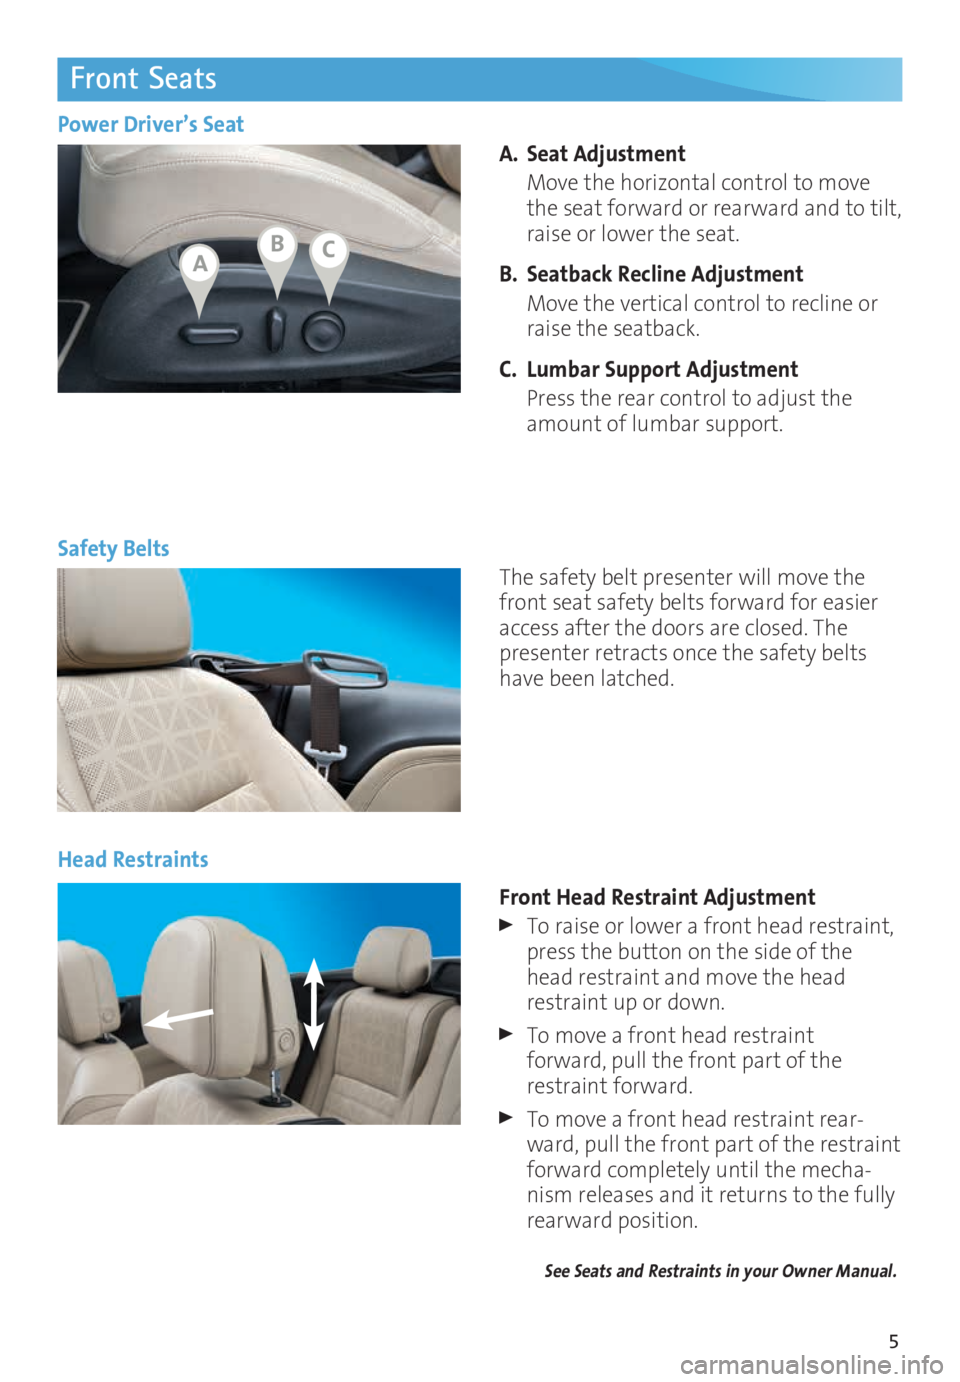 BUICK CASCADA 2016  Get To Know Guide 5
Front Seats
A. Seat Adjustment 
  Move the horizontal control to move 
the seat forward or rearward and to tilt, 
raise or lower the seat. 
B.  Seatback Recline Adjustment
  Move the vertical contro